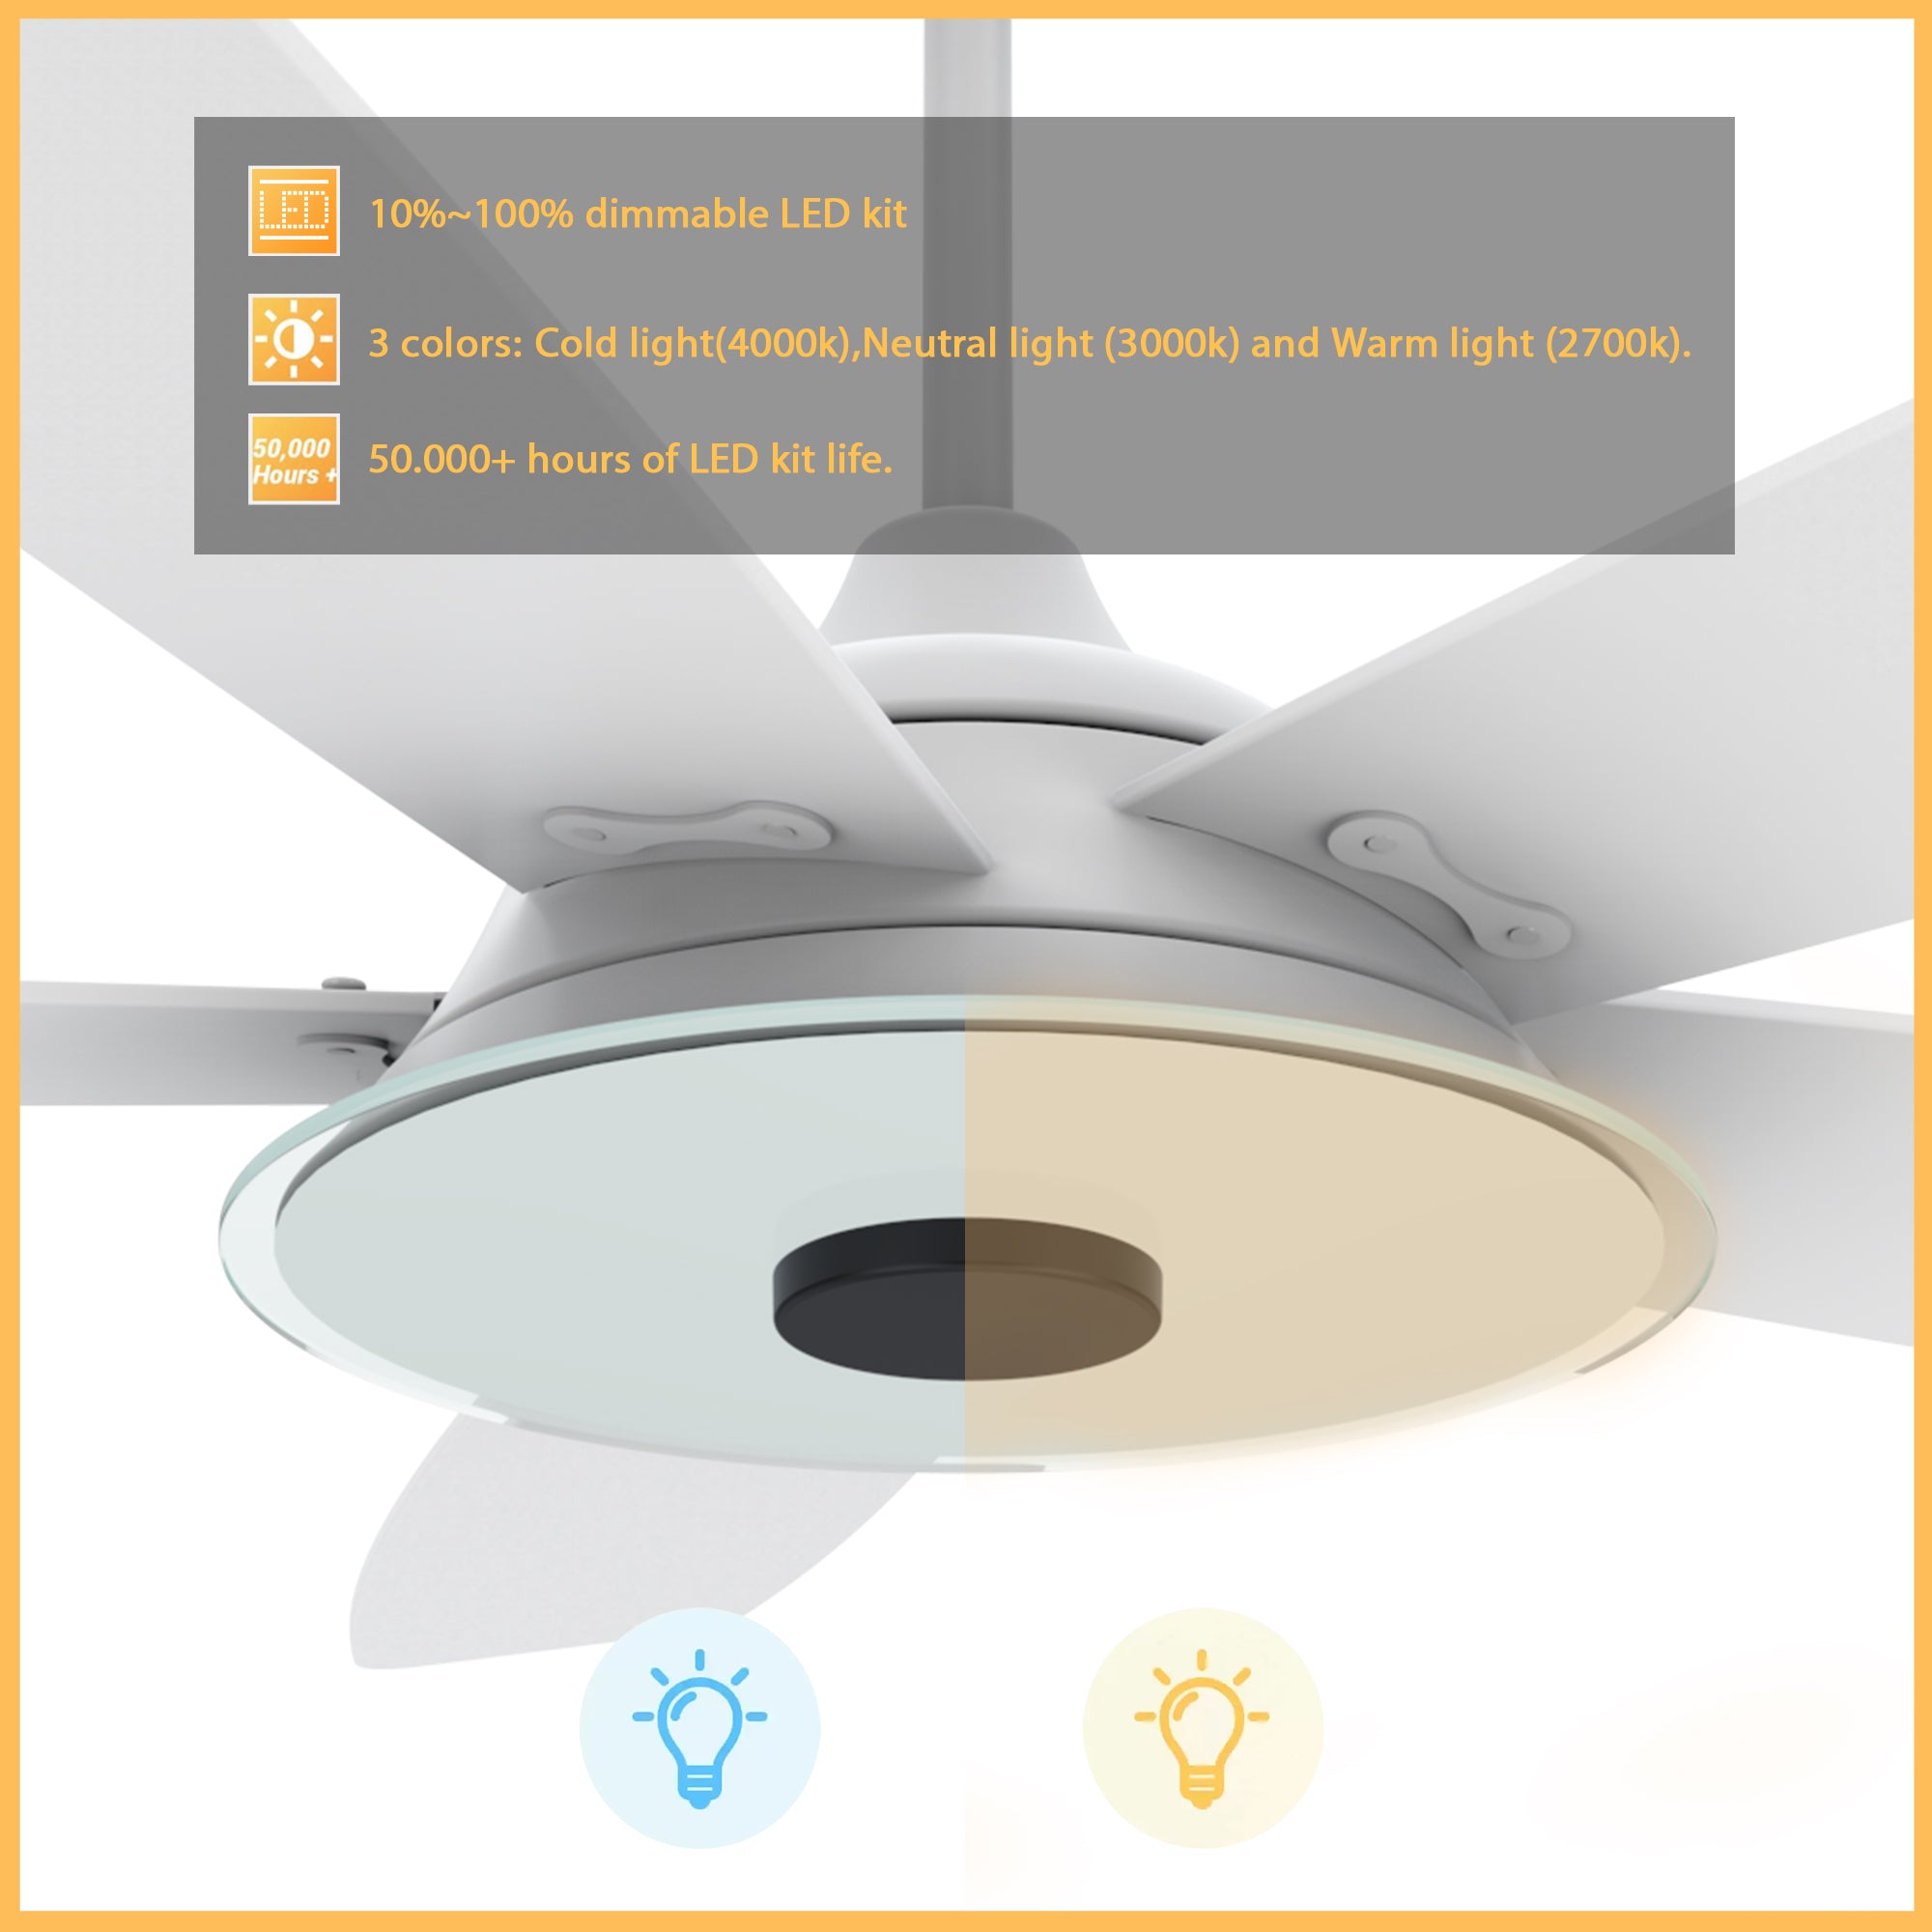 The Smafan Striker 52&#39;&#39; Smart Fan will blend beautifully in any décor trend. Six different airfoil color options, dimmable Led light perfectly matches your space. Compatible with Amazon Alexa and Google Assistant and Siri, Striker helps you control your fan with the phone app, remote, and voice command.